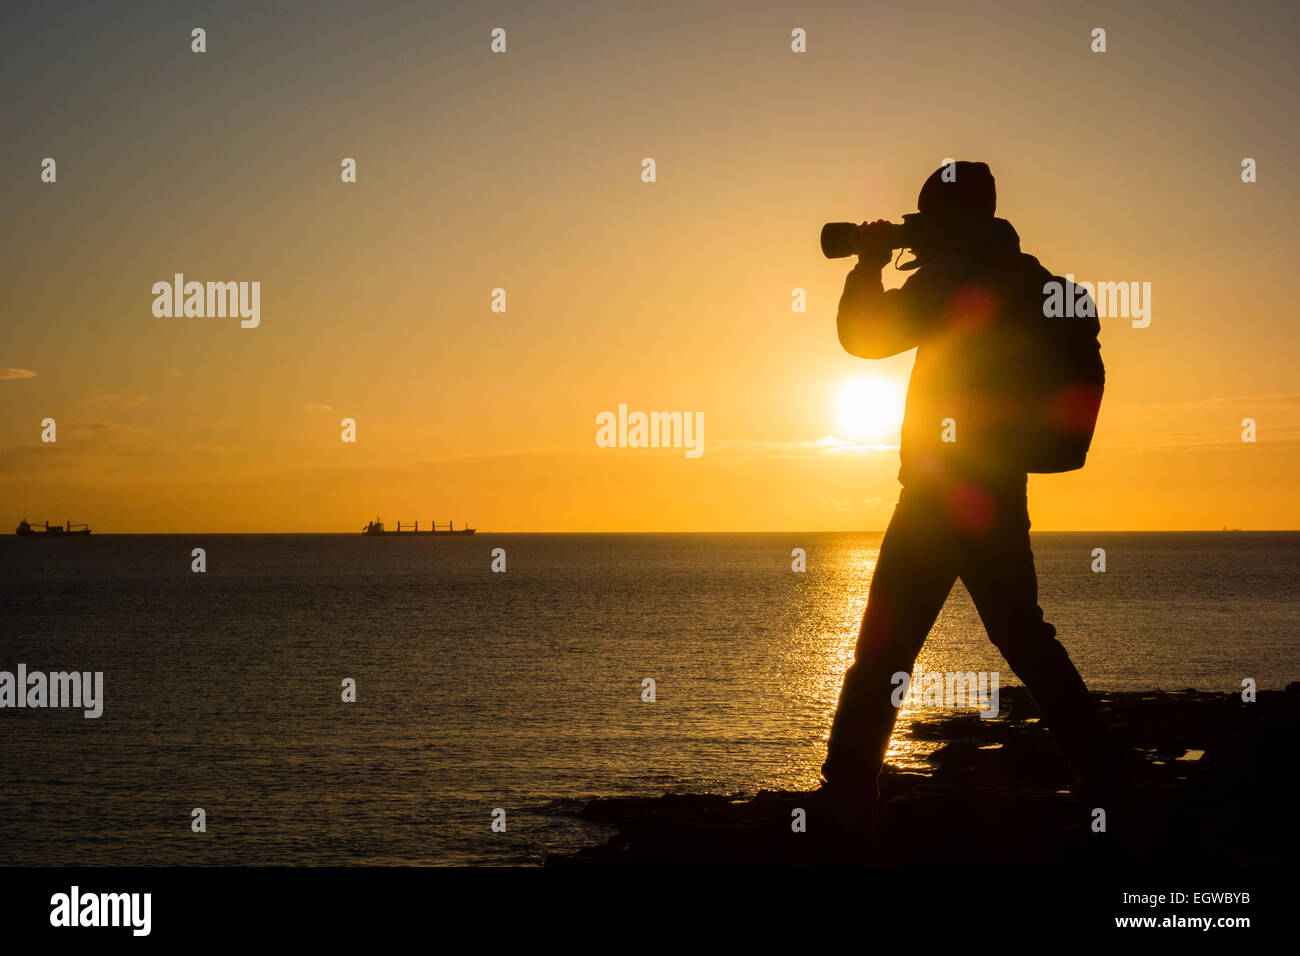 Tynemouth, North Tyneside, England, UK. Tuesday, 3rd March 2015. Weather: photographer at sunrise  on rocky outcrop near Tynemouth on a clear chilly morning on the north east coast. Credit:  ALANDAWSONPHOTOGRAPHY/Alamy Live News Stock Photo